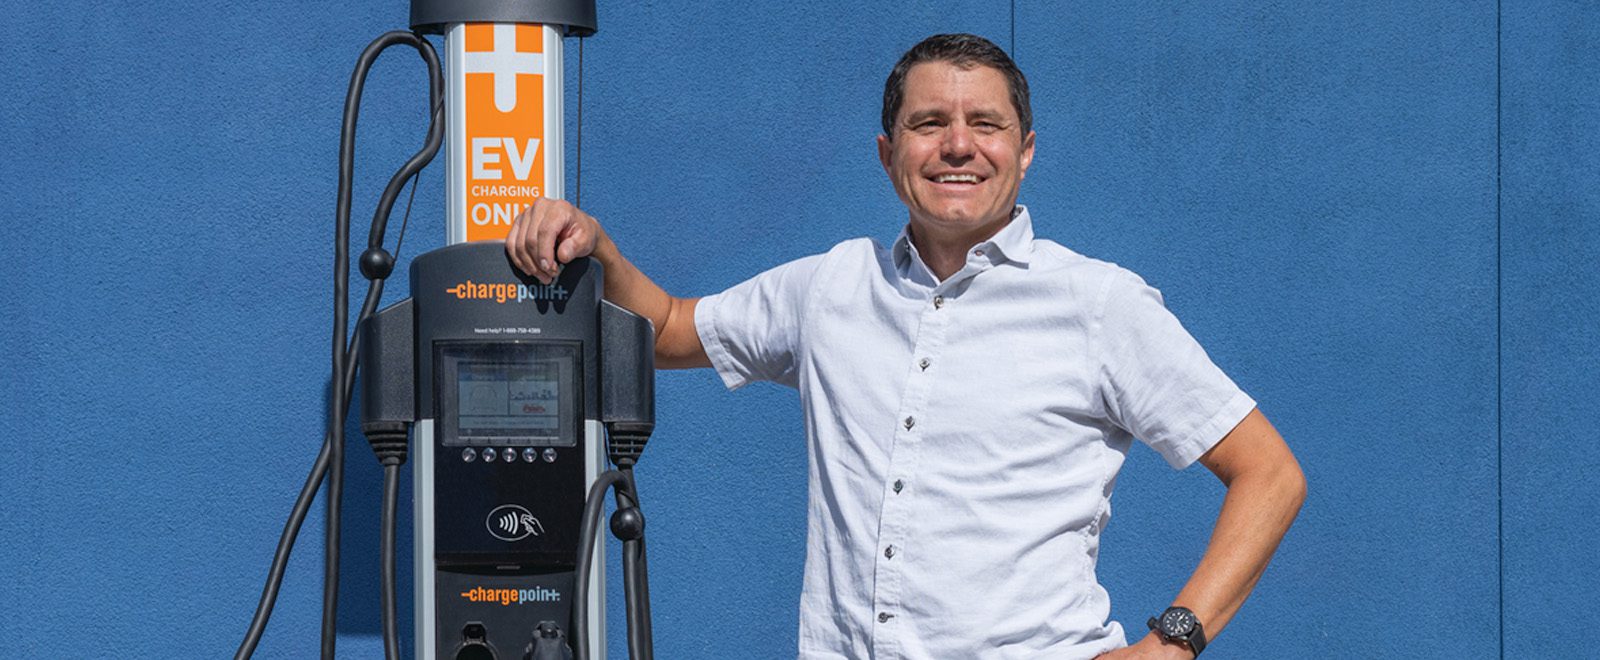 Alum Doug Campbell smiling and posing with electric vehicle charging station